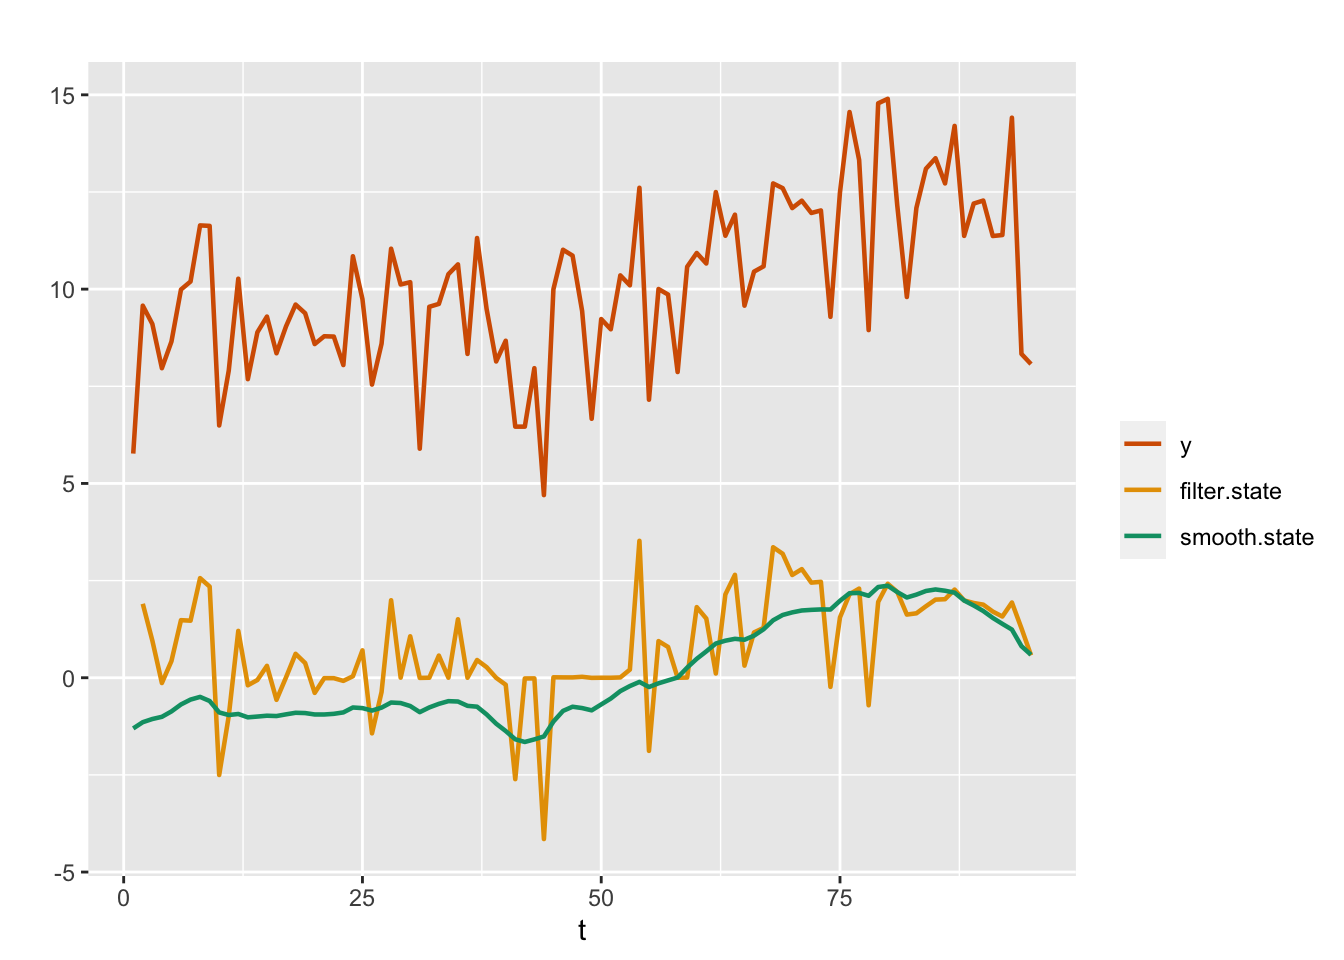 Observed data (red) and posterior means from filtered (yellow) and smoothed (green) distributions for the AR(1) with level plus noise model (Model 1).